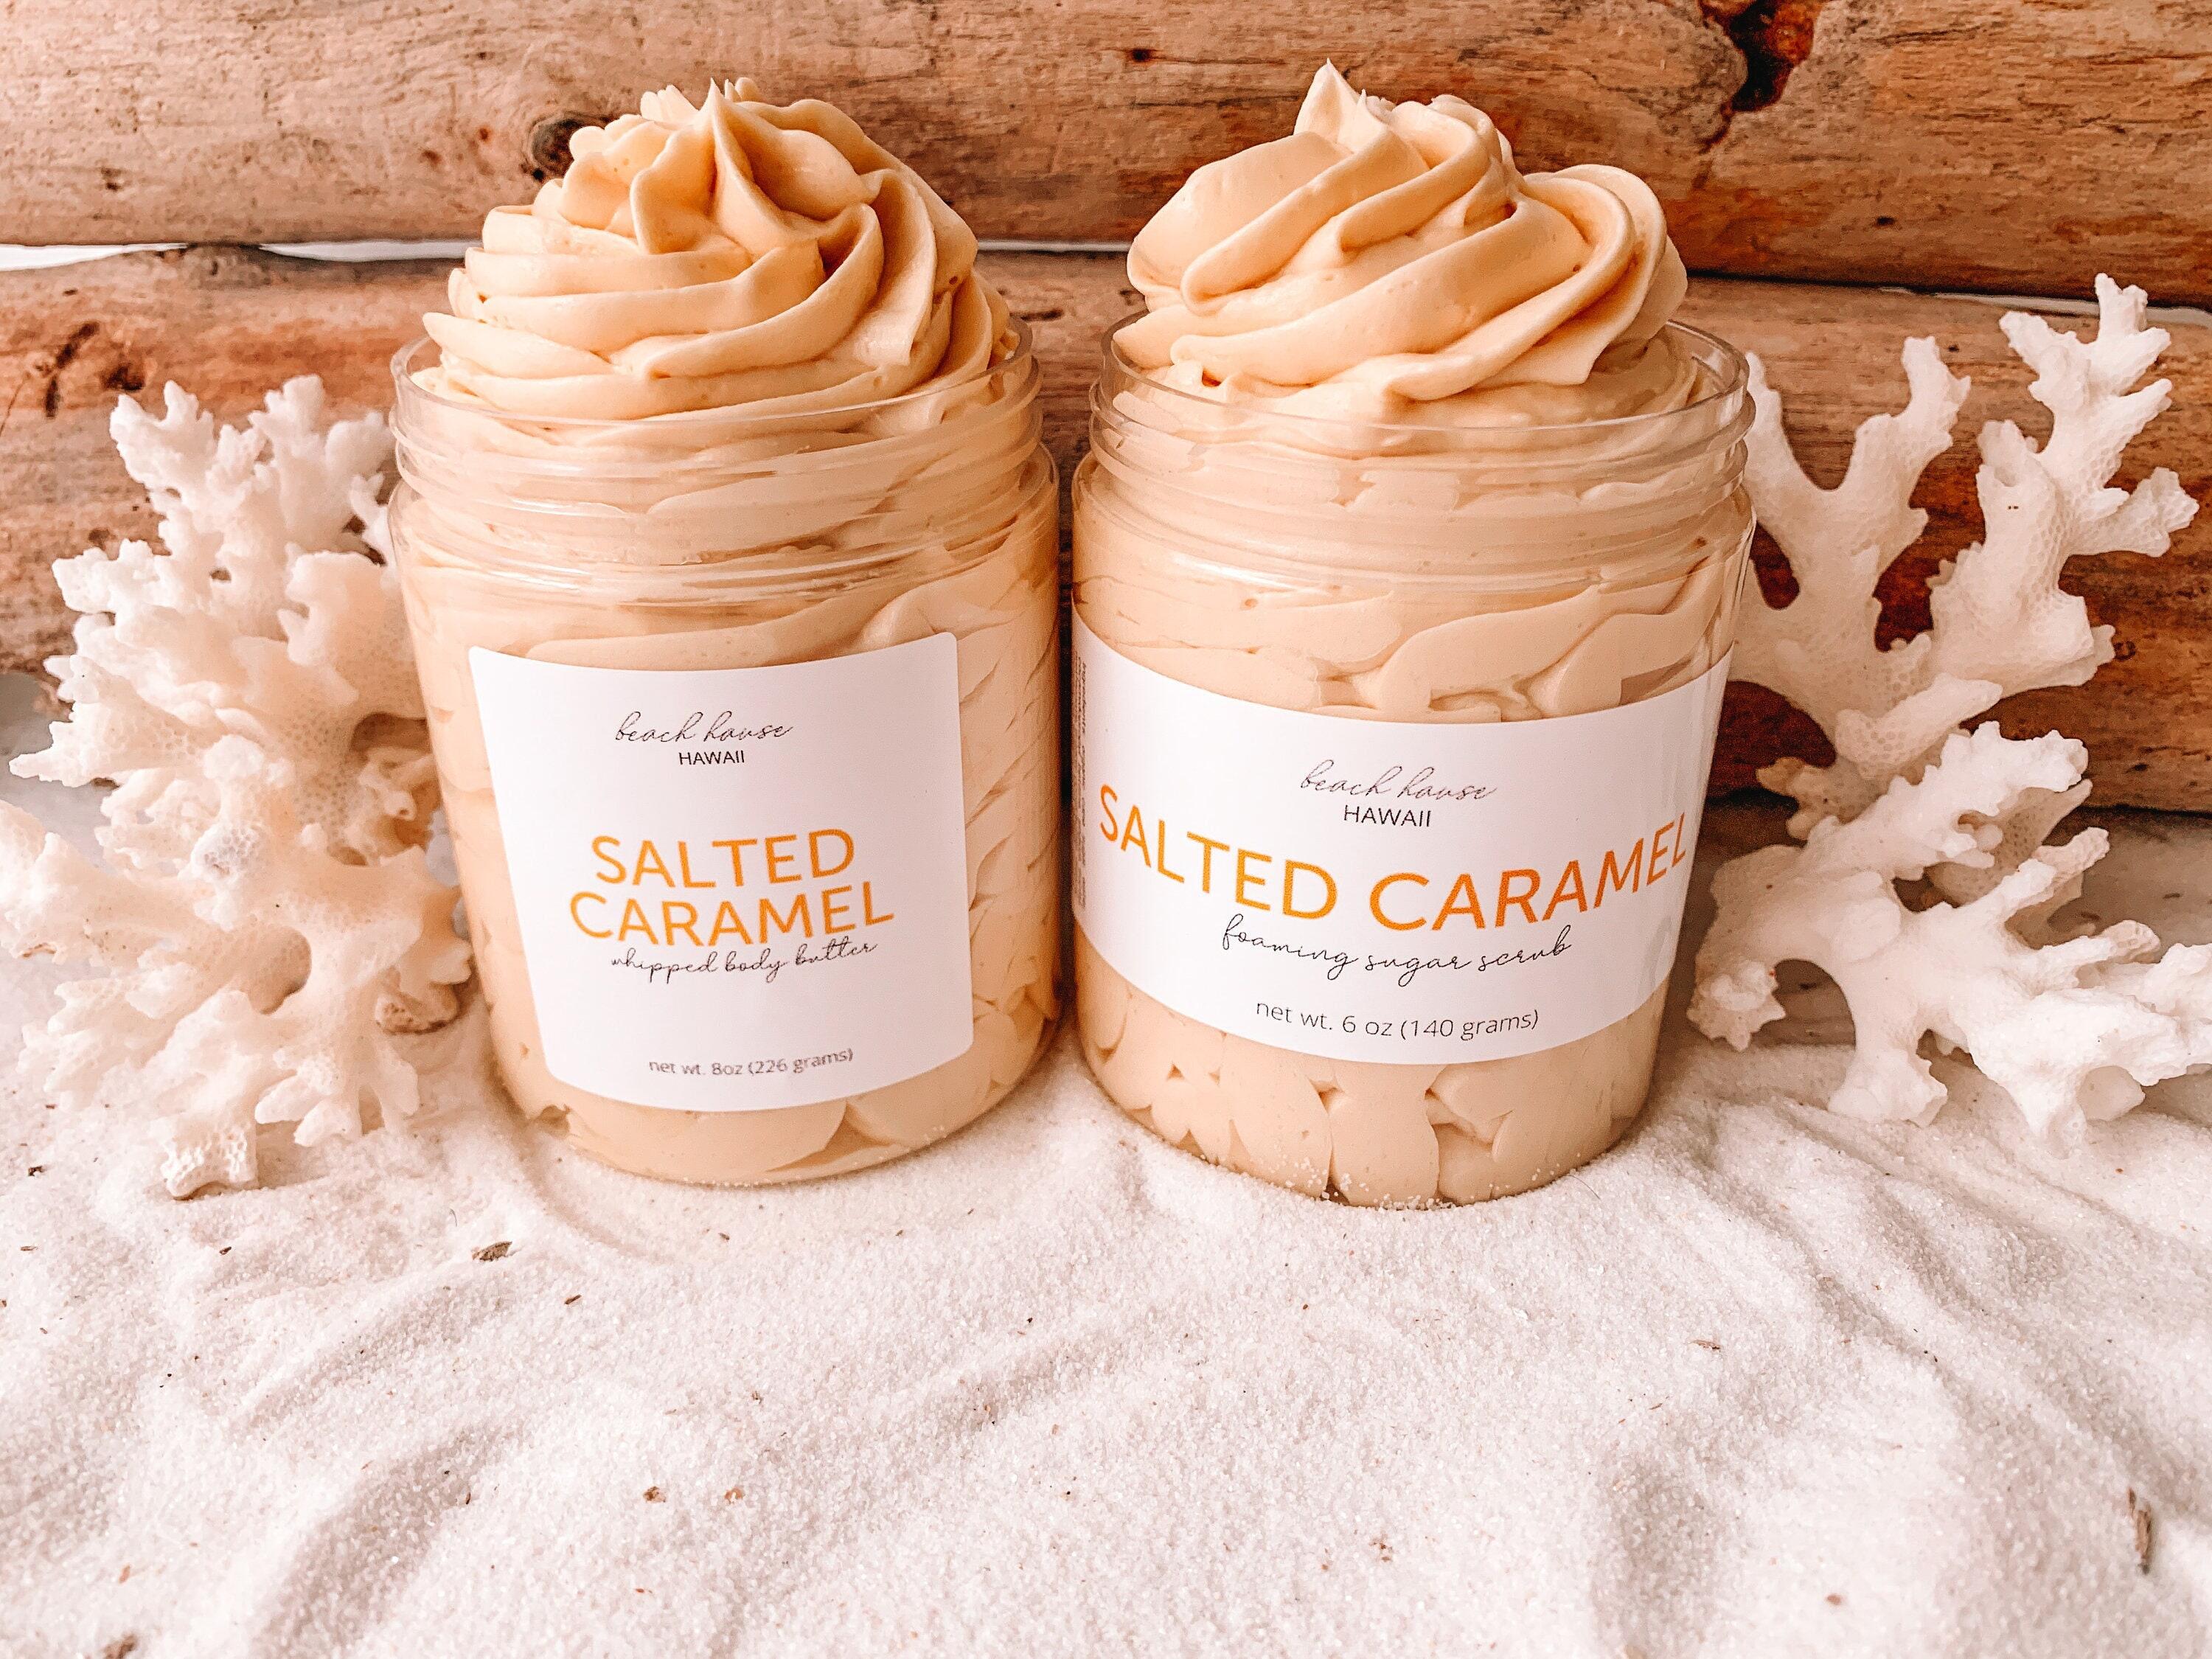 4Oz] Salted Caramel Fragrance Oil For Candle Making Scents For Soap Making,  Perfume Oils, Soy Candles, Home Scents Oil Diffusers, Bath Scent Bomb Oils,  Linen Spray, Lotions, Car Freshies 